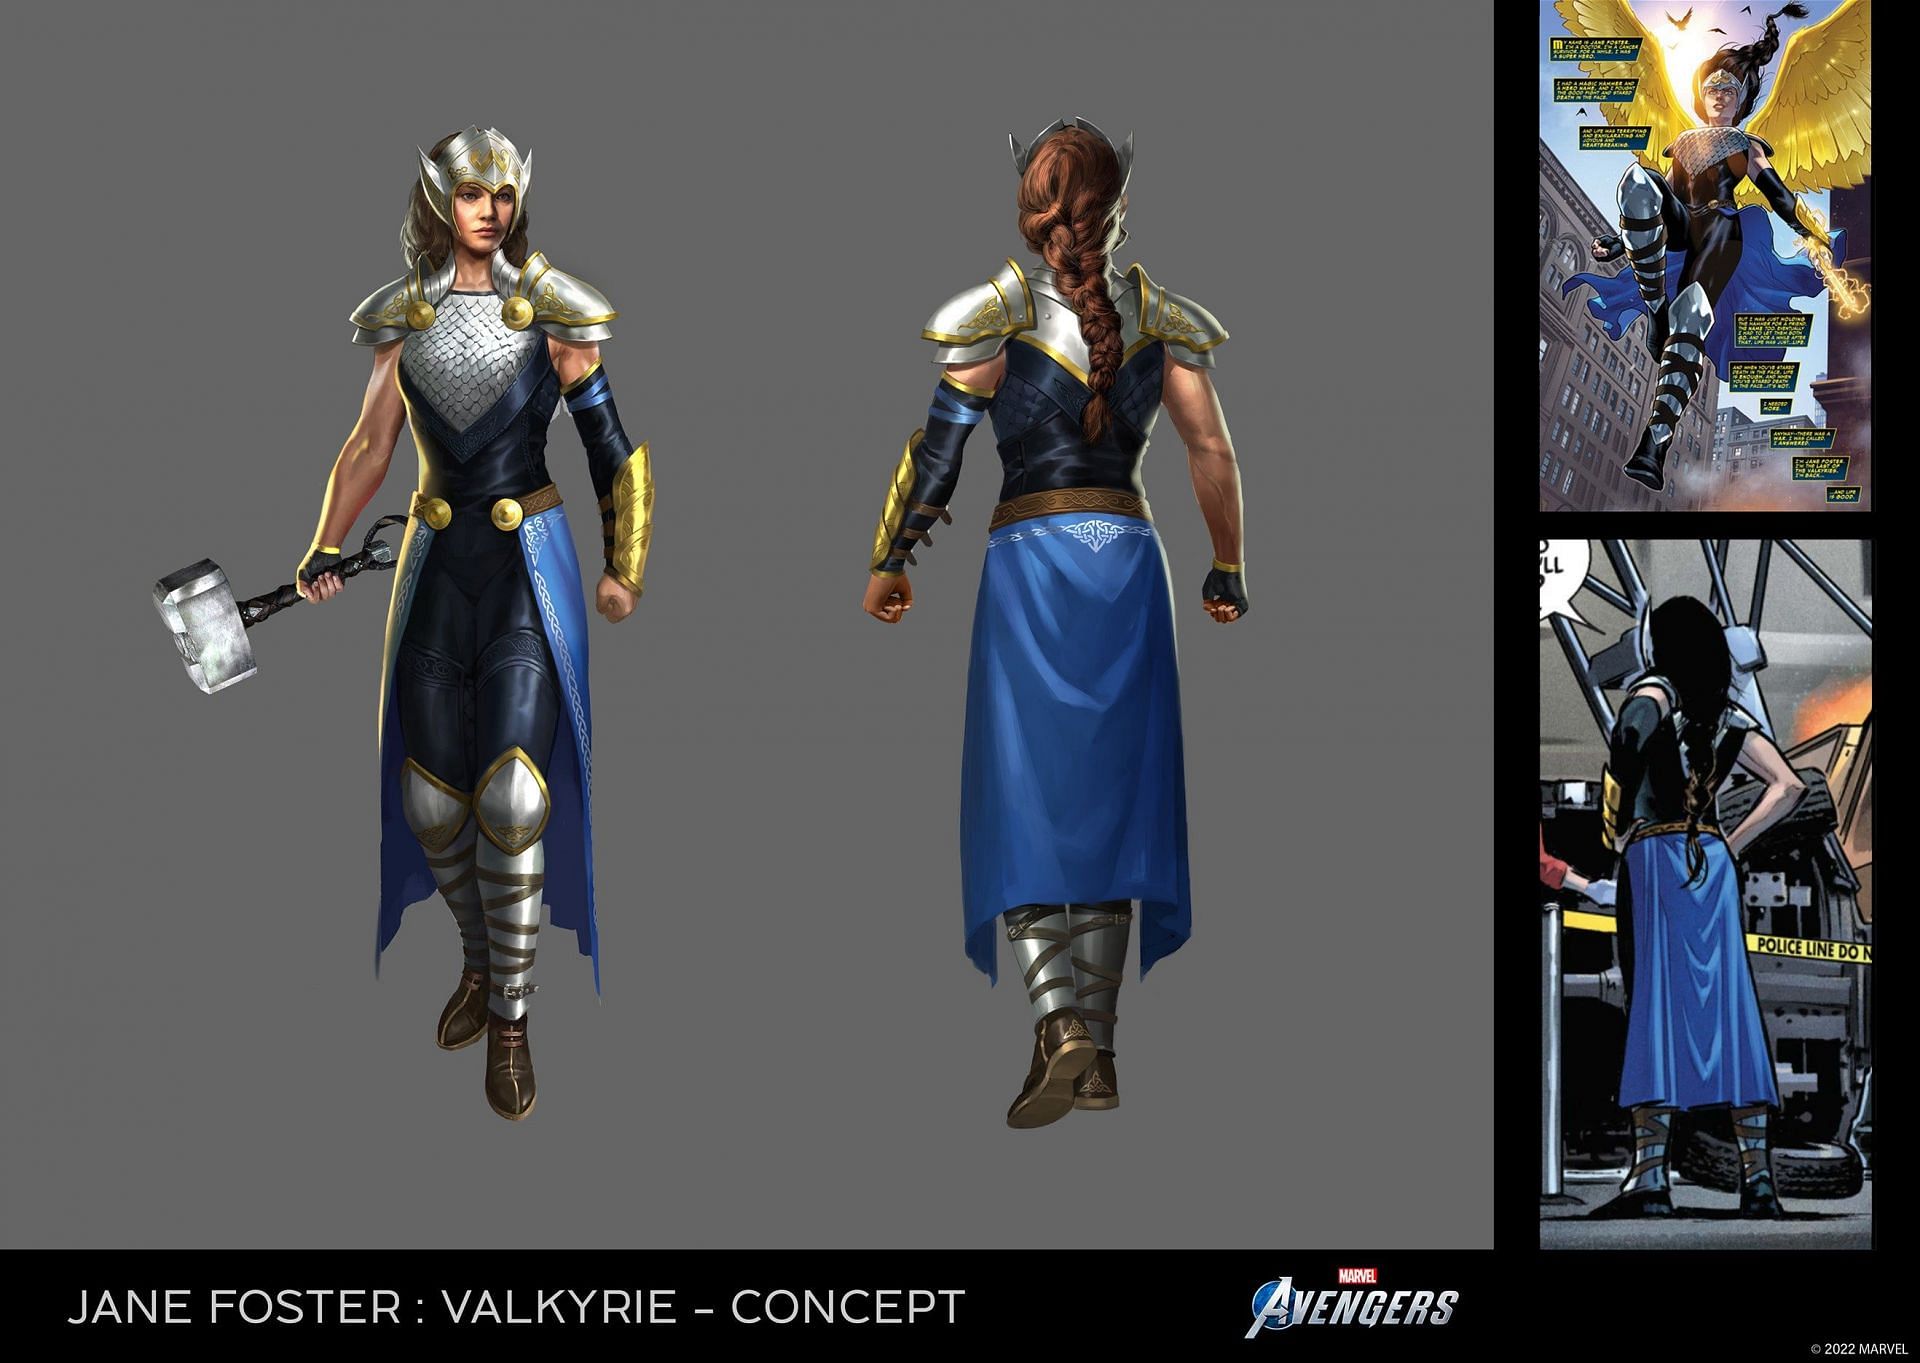  Inspired by Jane Foster&#039;s alias Valkyrie, Thor #1 (2014) (Image via Square Enix)